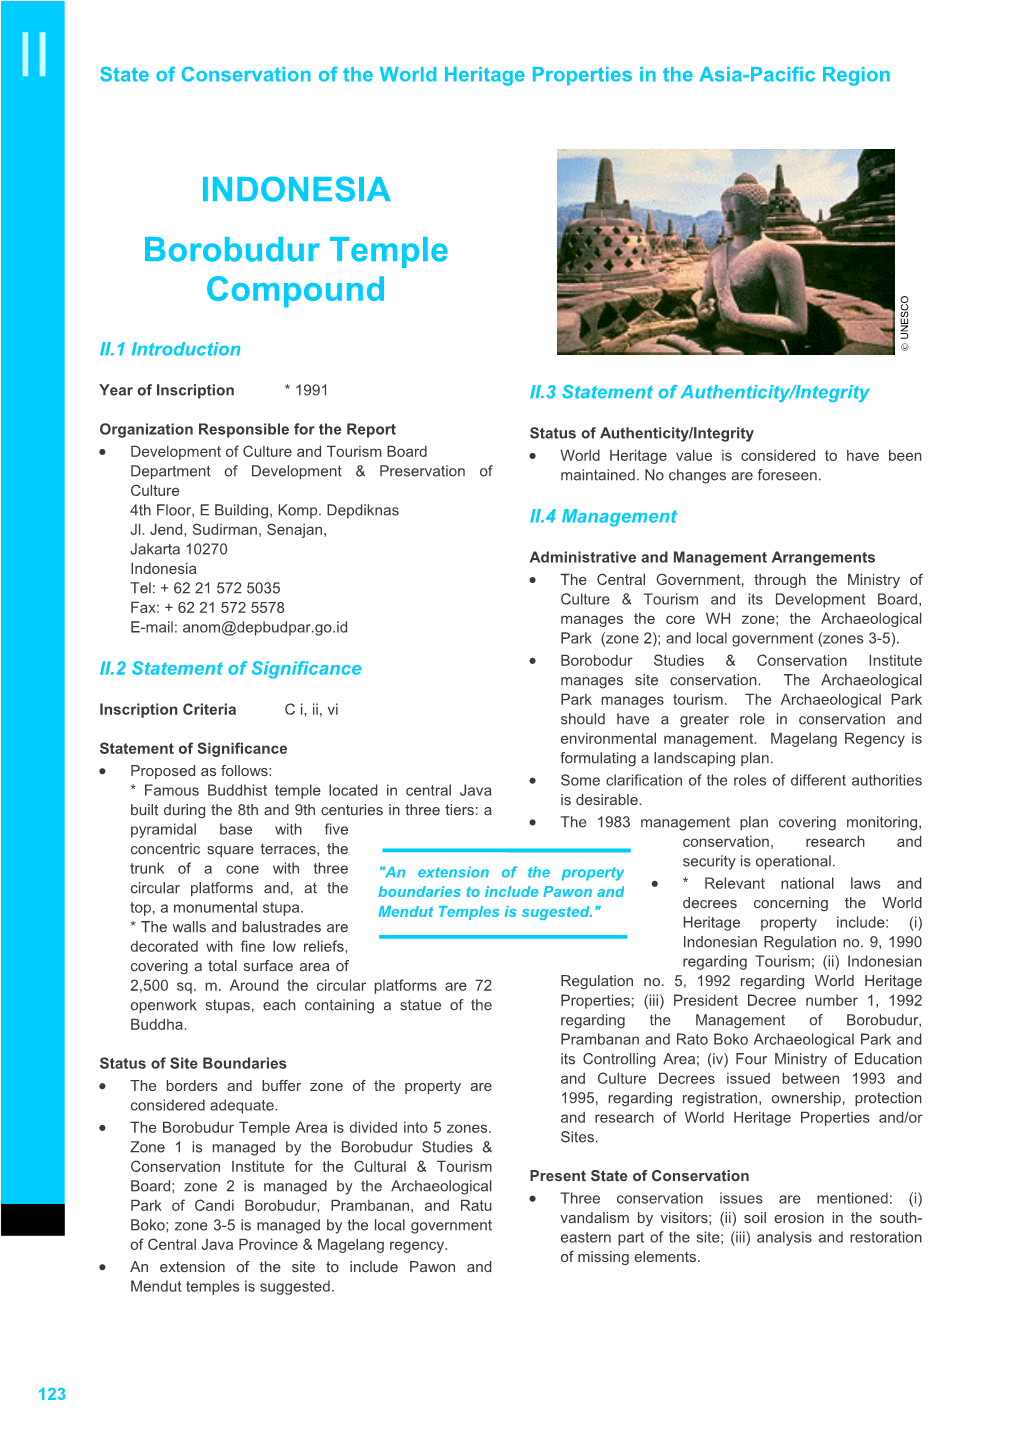 Borobudur Temple Compounds with Core (Zona I) • Construction of High-Rises Near the Site, and Buffer (Zona II and III) Zones • Uncontrolled Vendors in Zones 1 & 2